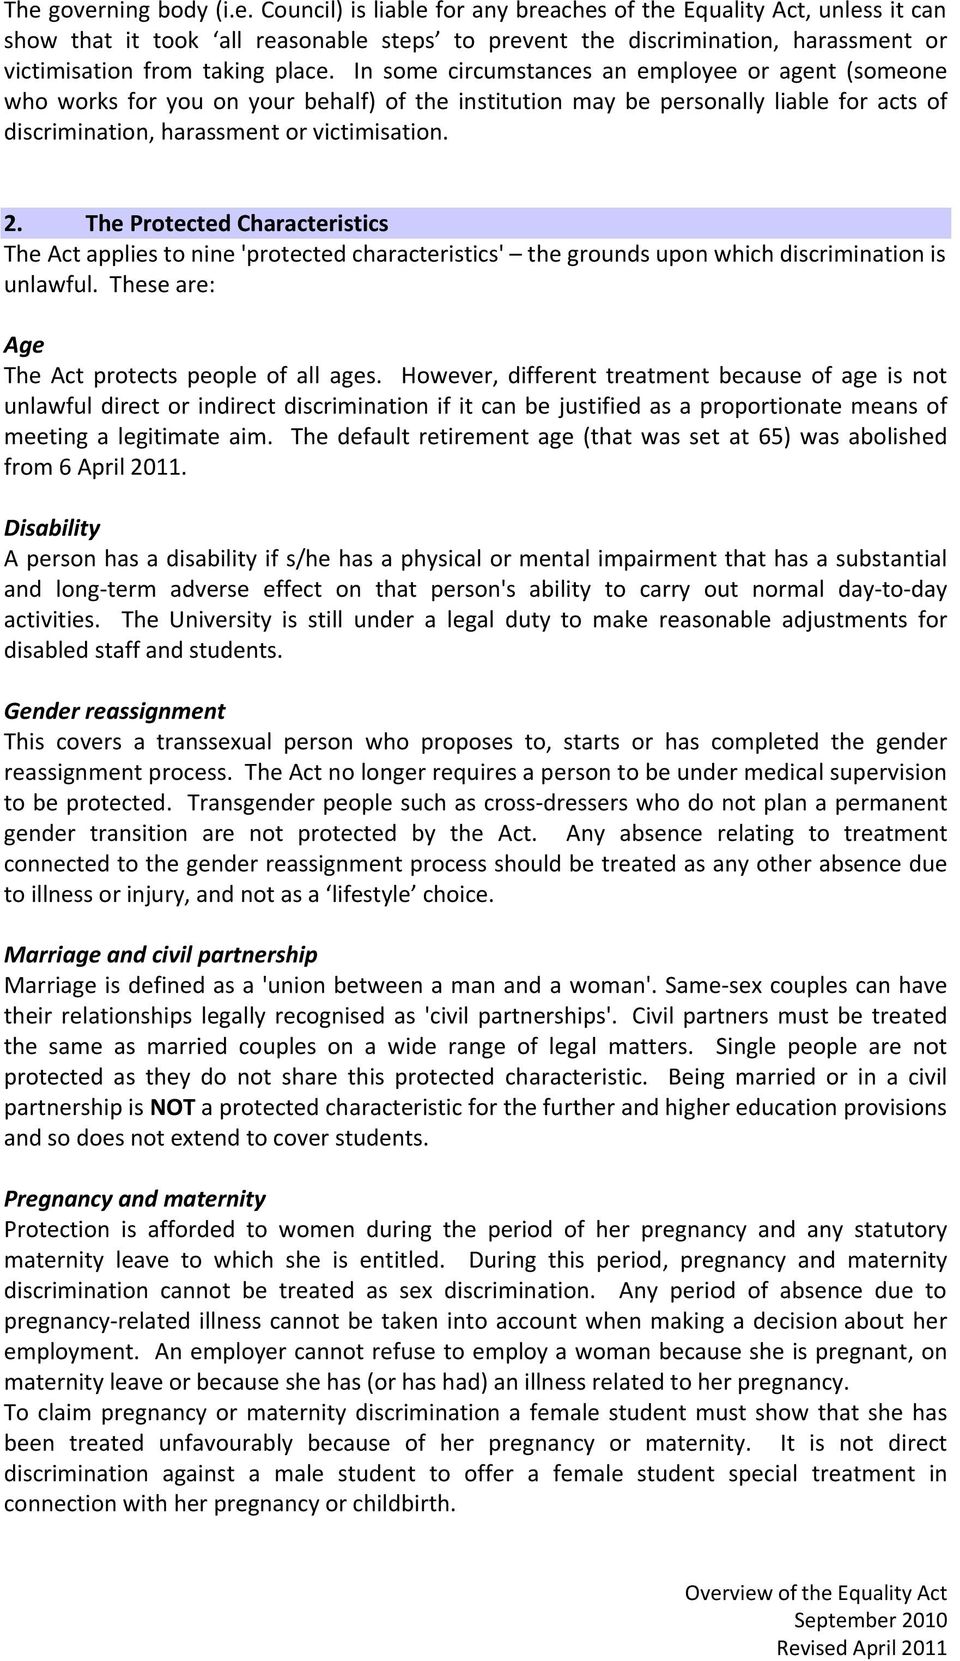 The Protected Characteristics The Act applies to nine 'protected characteristics' the grounds upon which discrimination is unlawful. These are: Age The Act protects people of all ages.